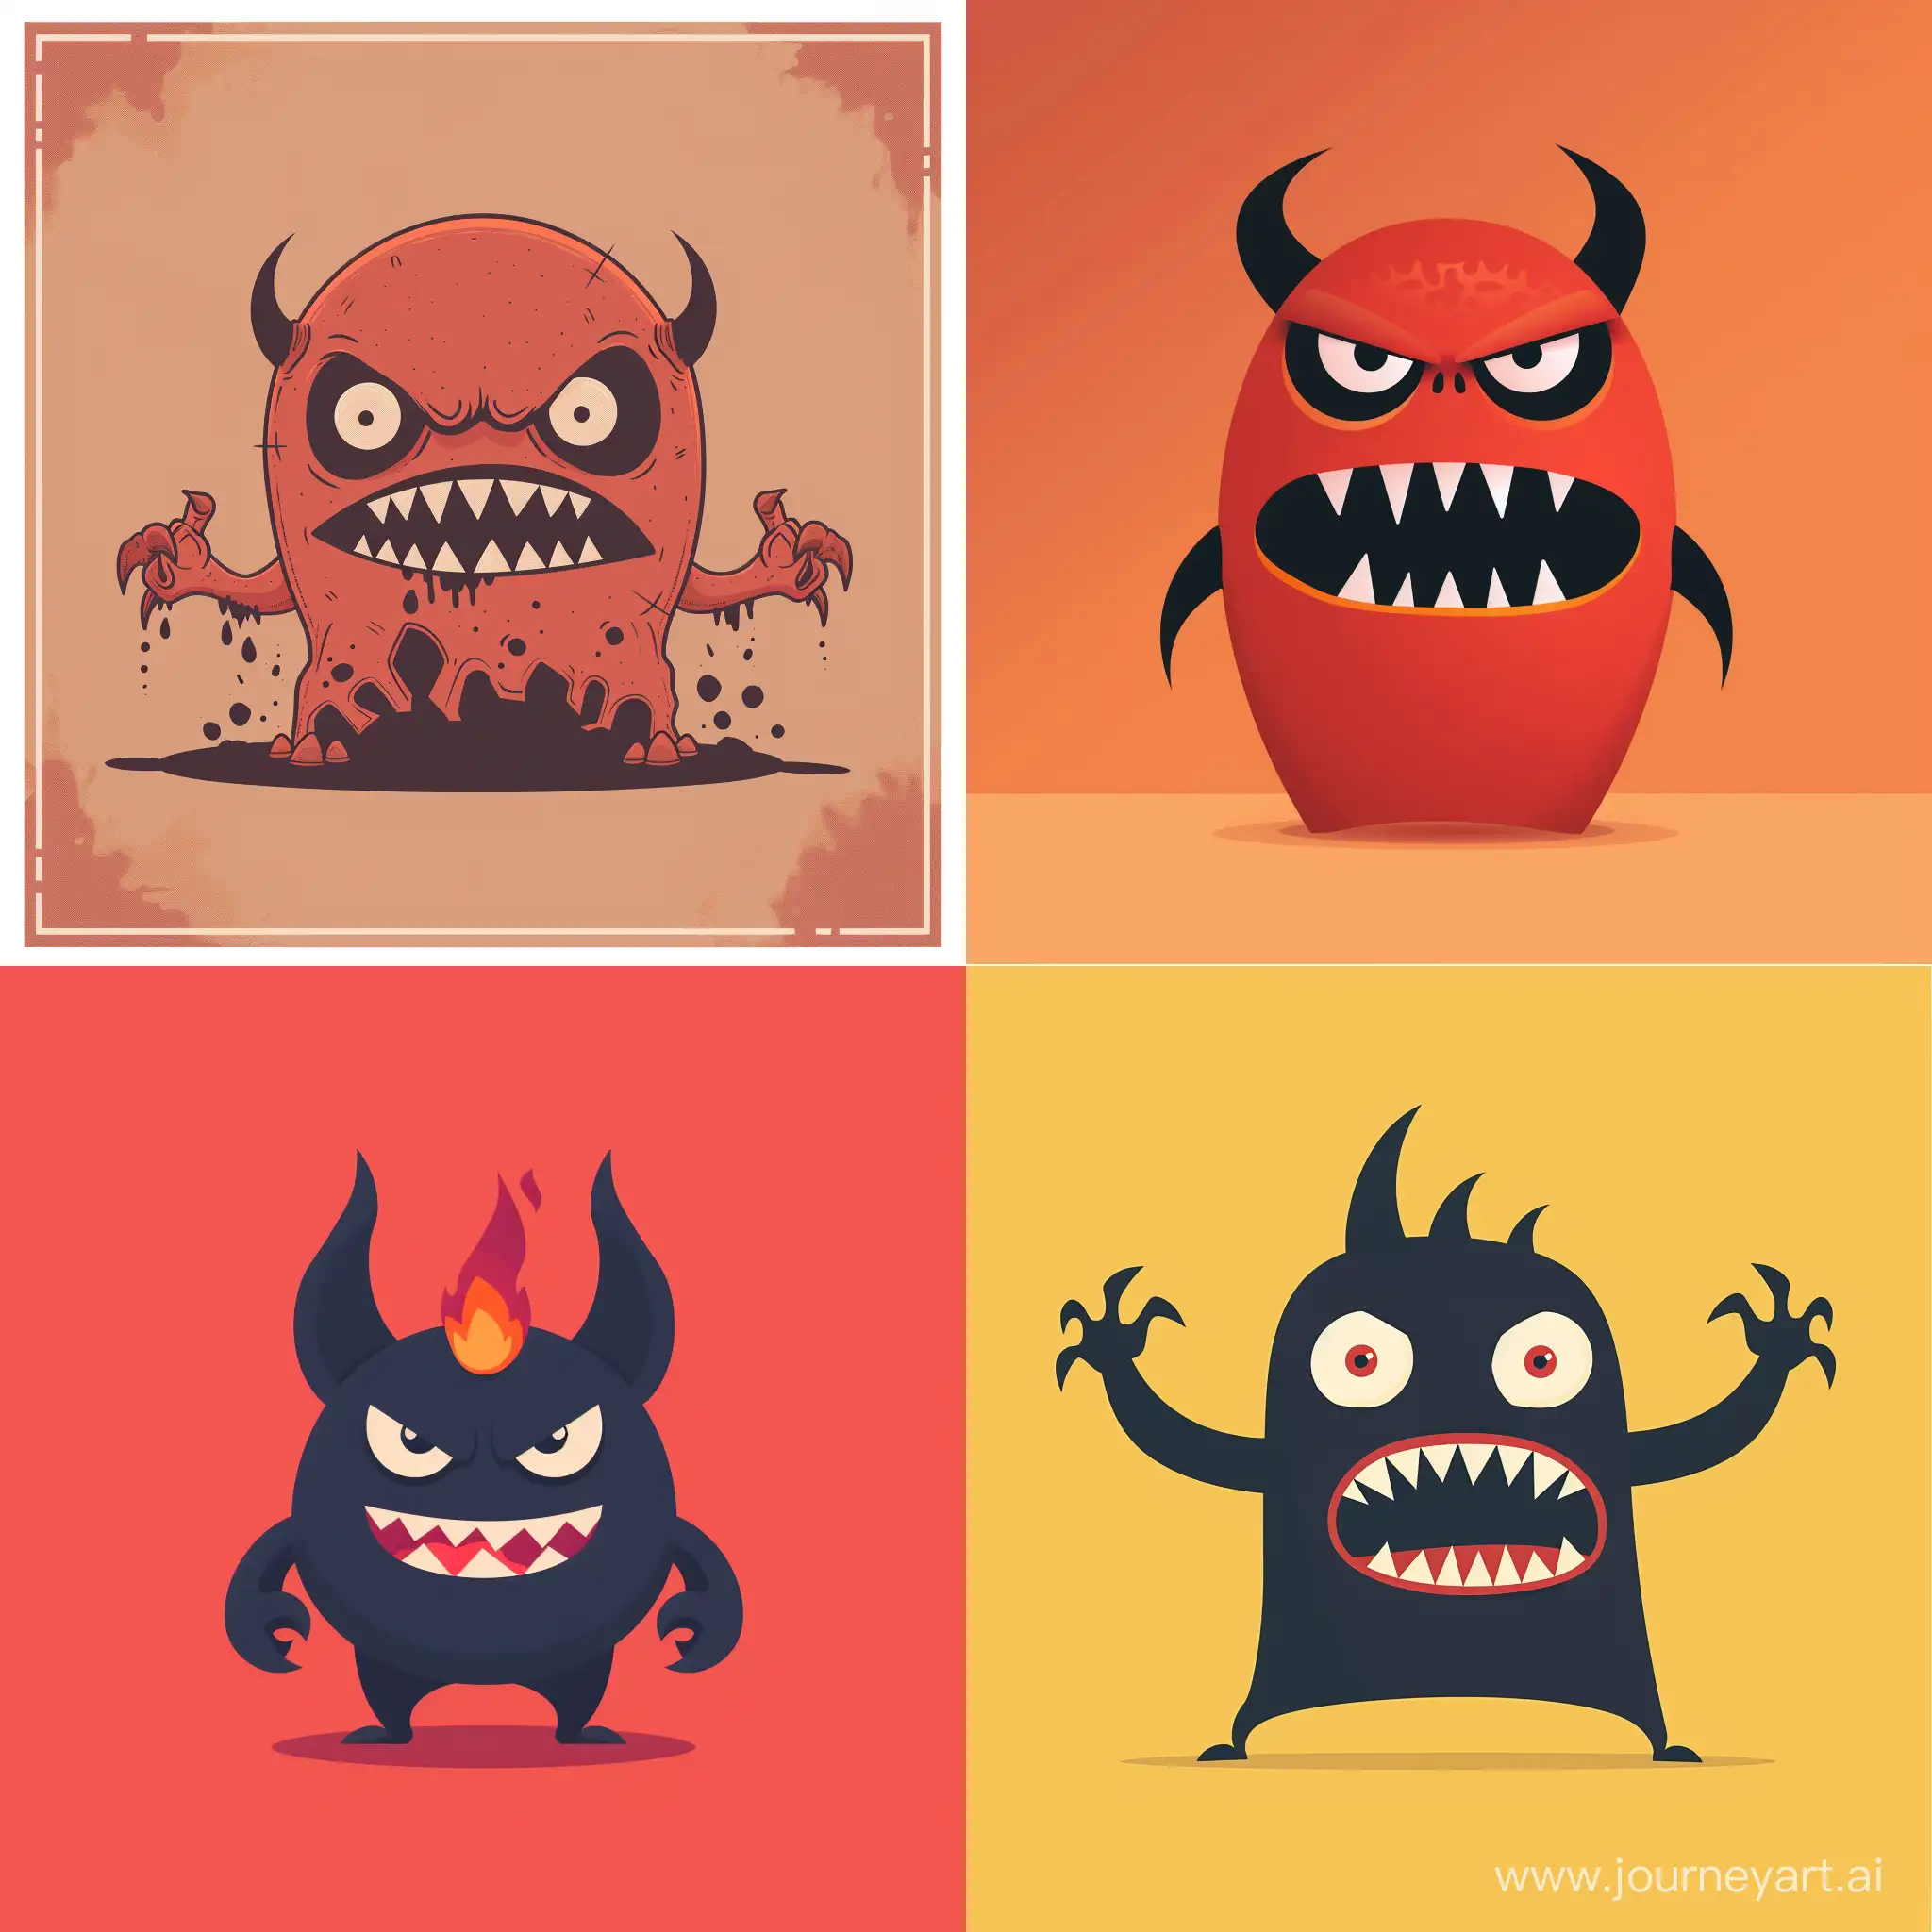 illustration a minimal graphic image about Bad Backlinks which is like an evil with a plain color background